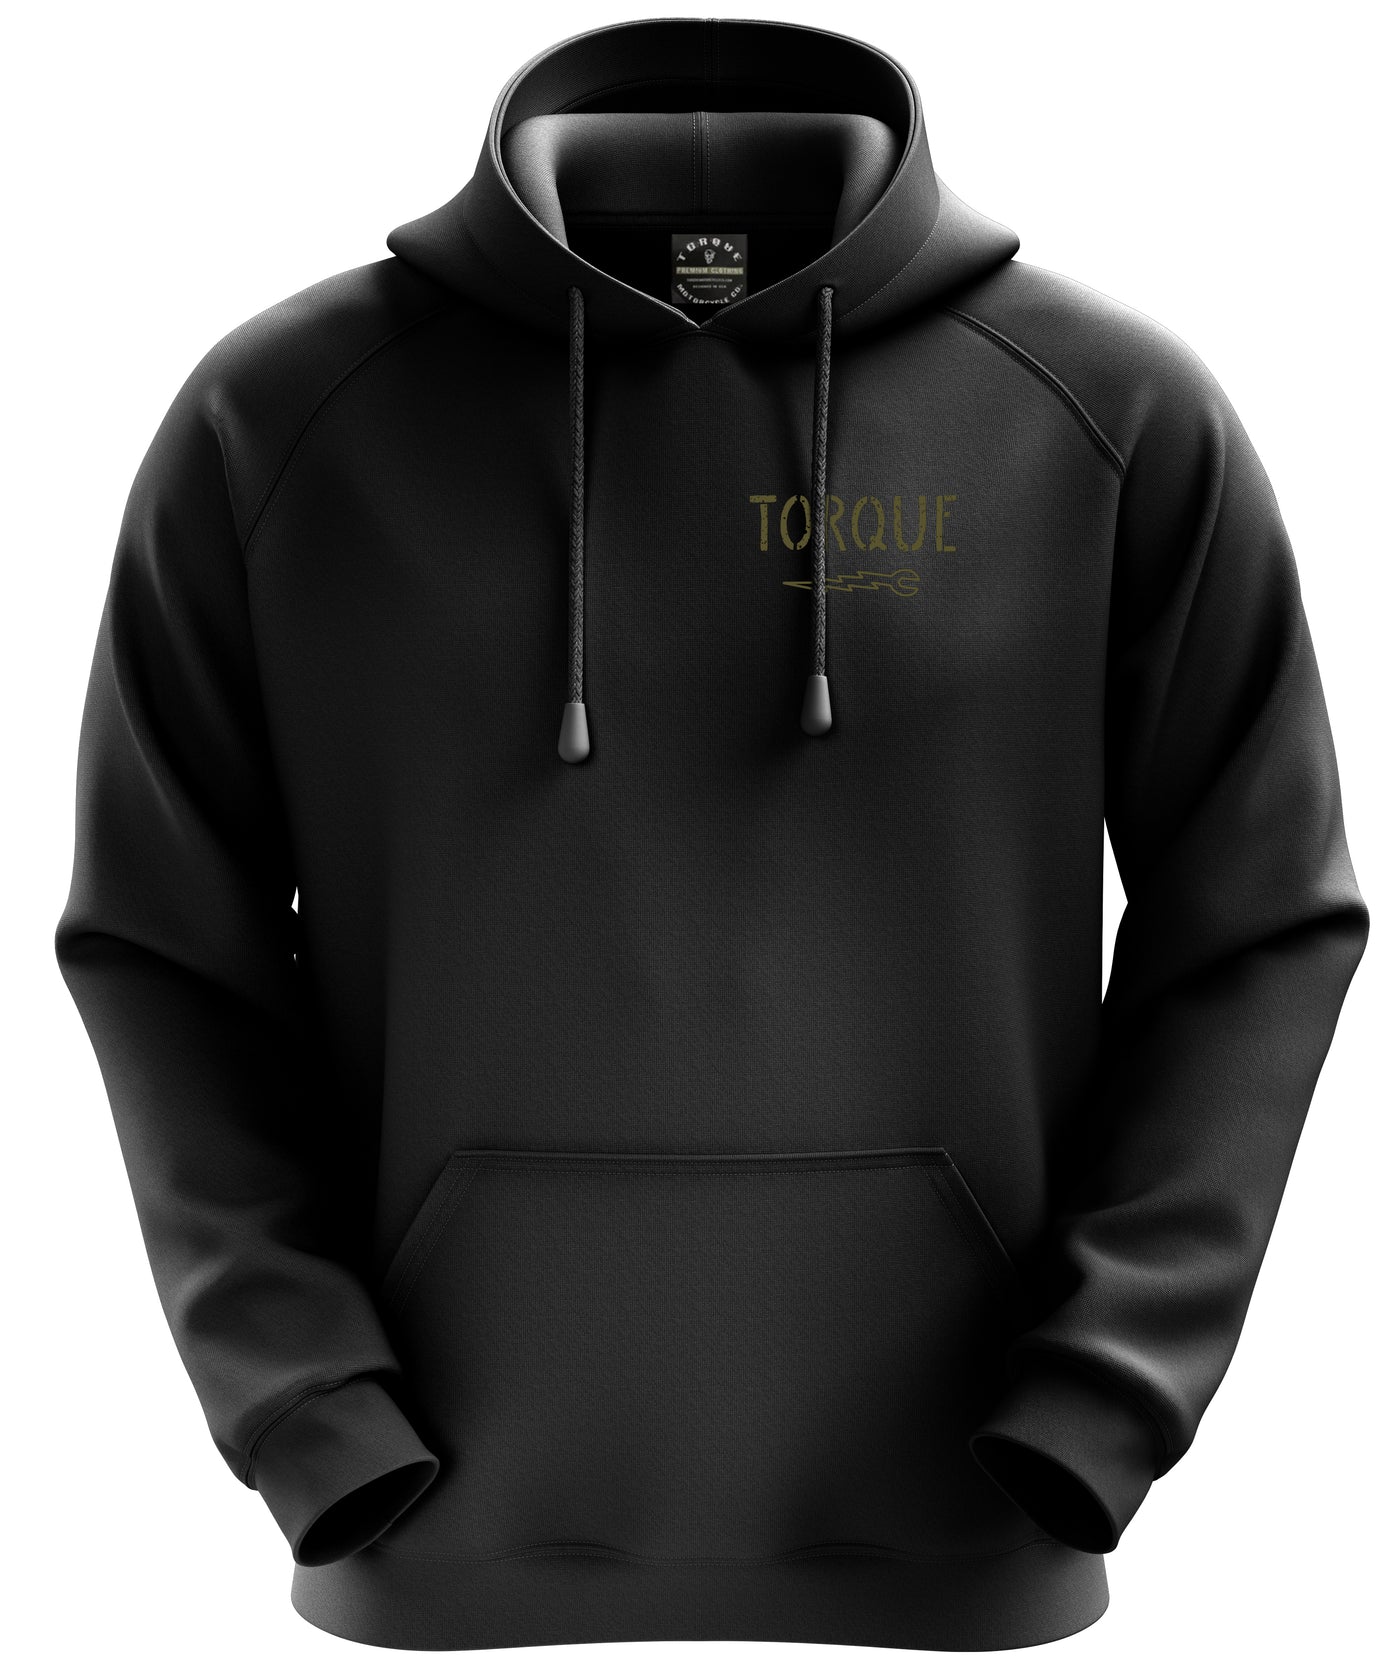 Product photo: Black hoodie with ribbed texture.  Torque logo on left breast.